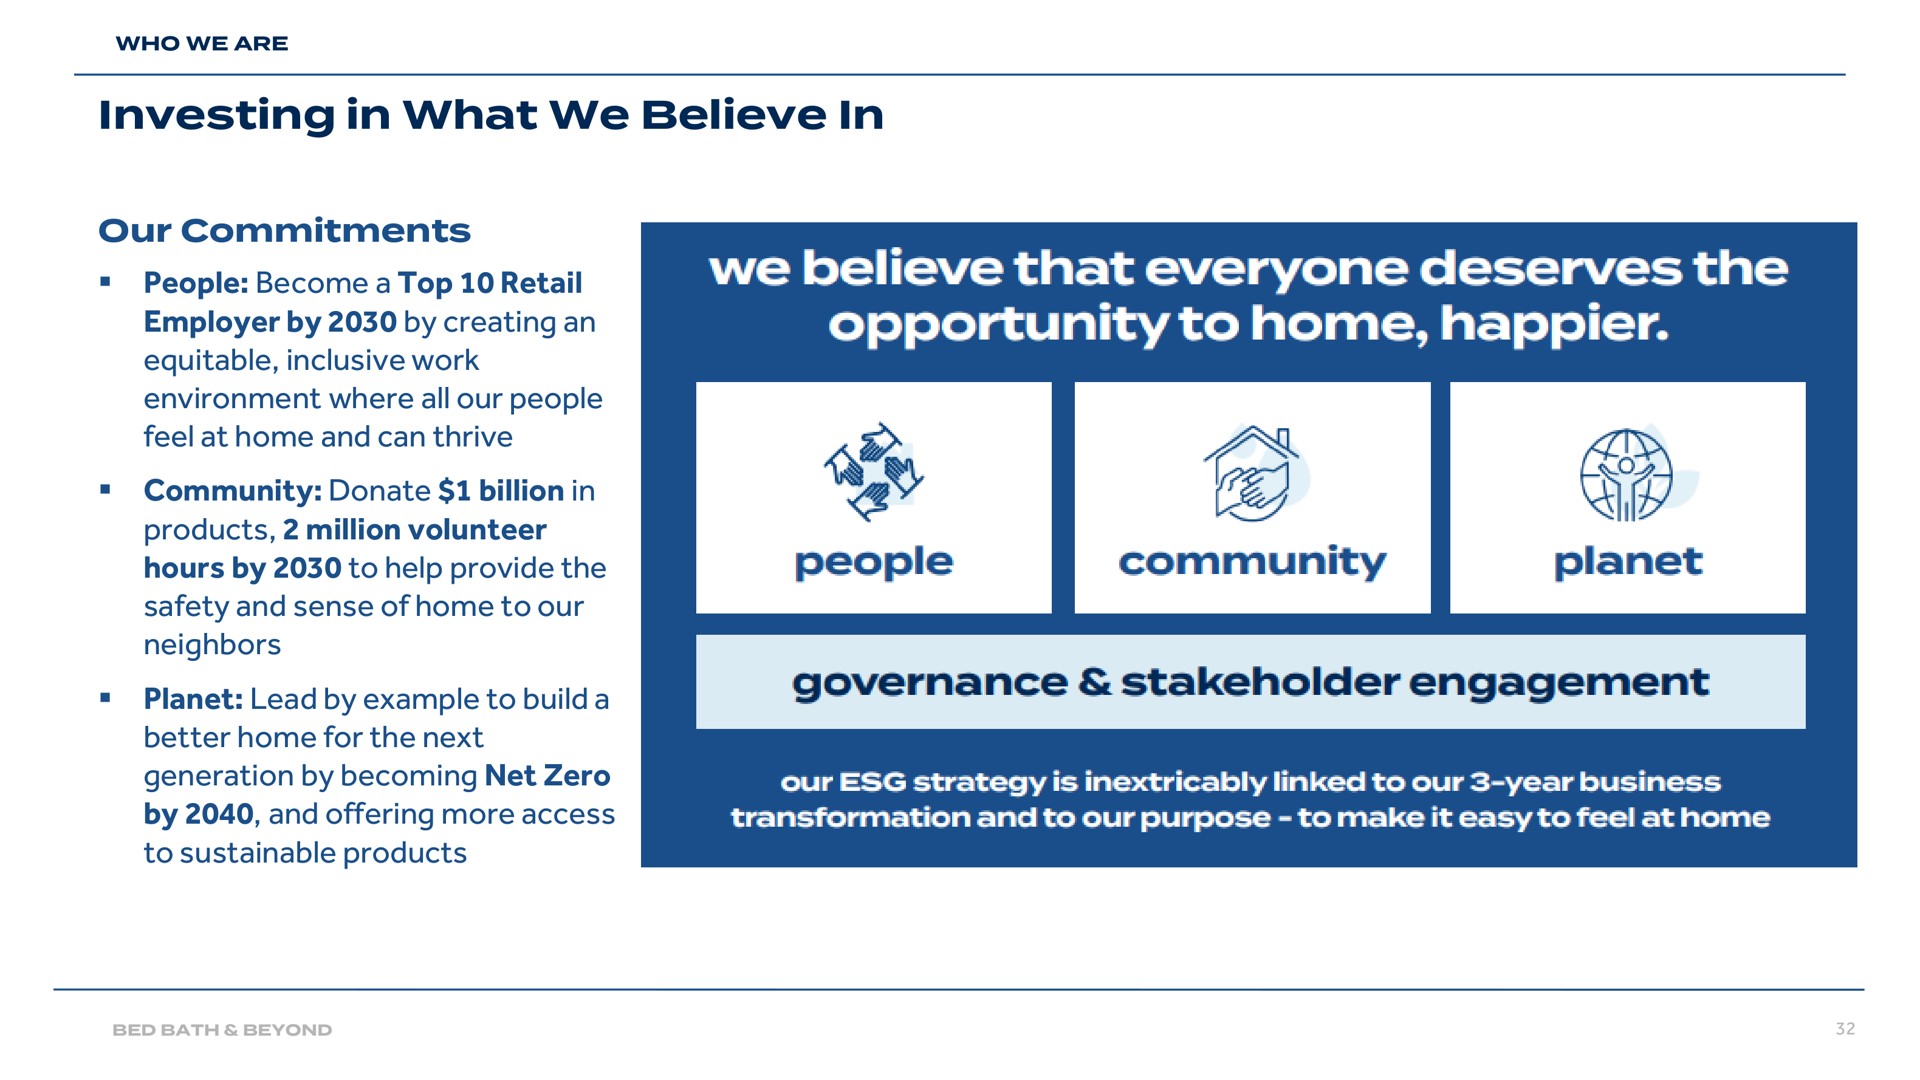 investing in what we believe in top employer by by creating an planet lead by example to that everyone deserves the opportunity to home happier governance stakeholder engagement | Bed Bath & Beyond